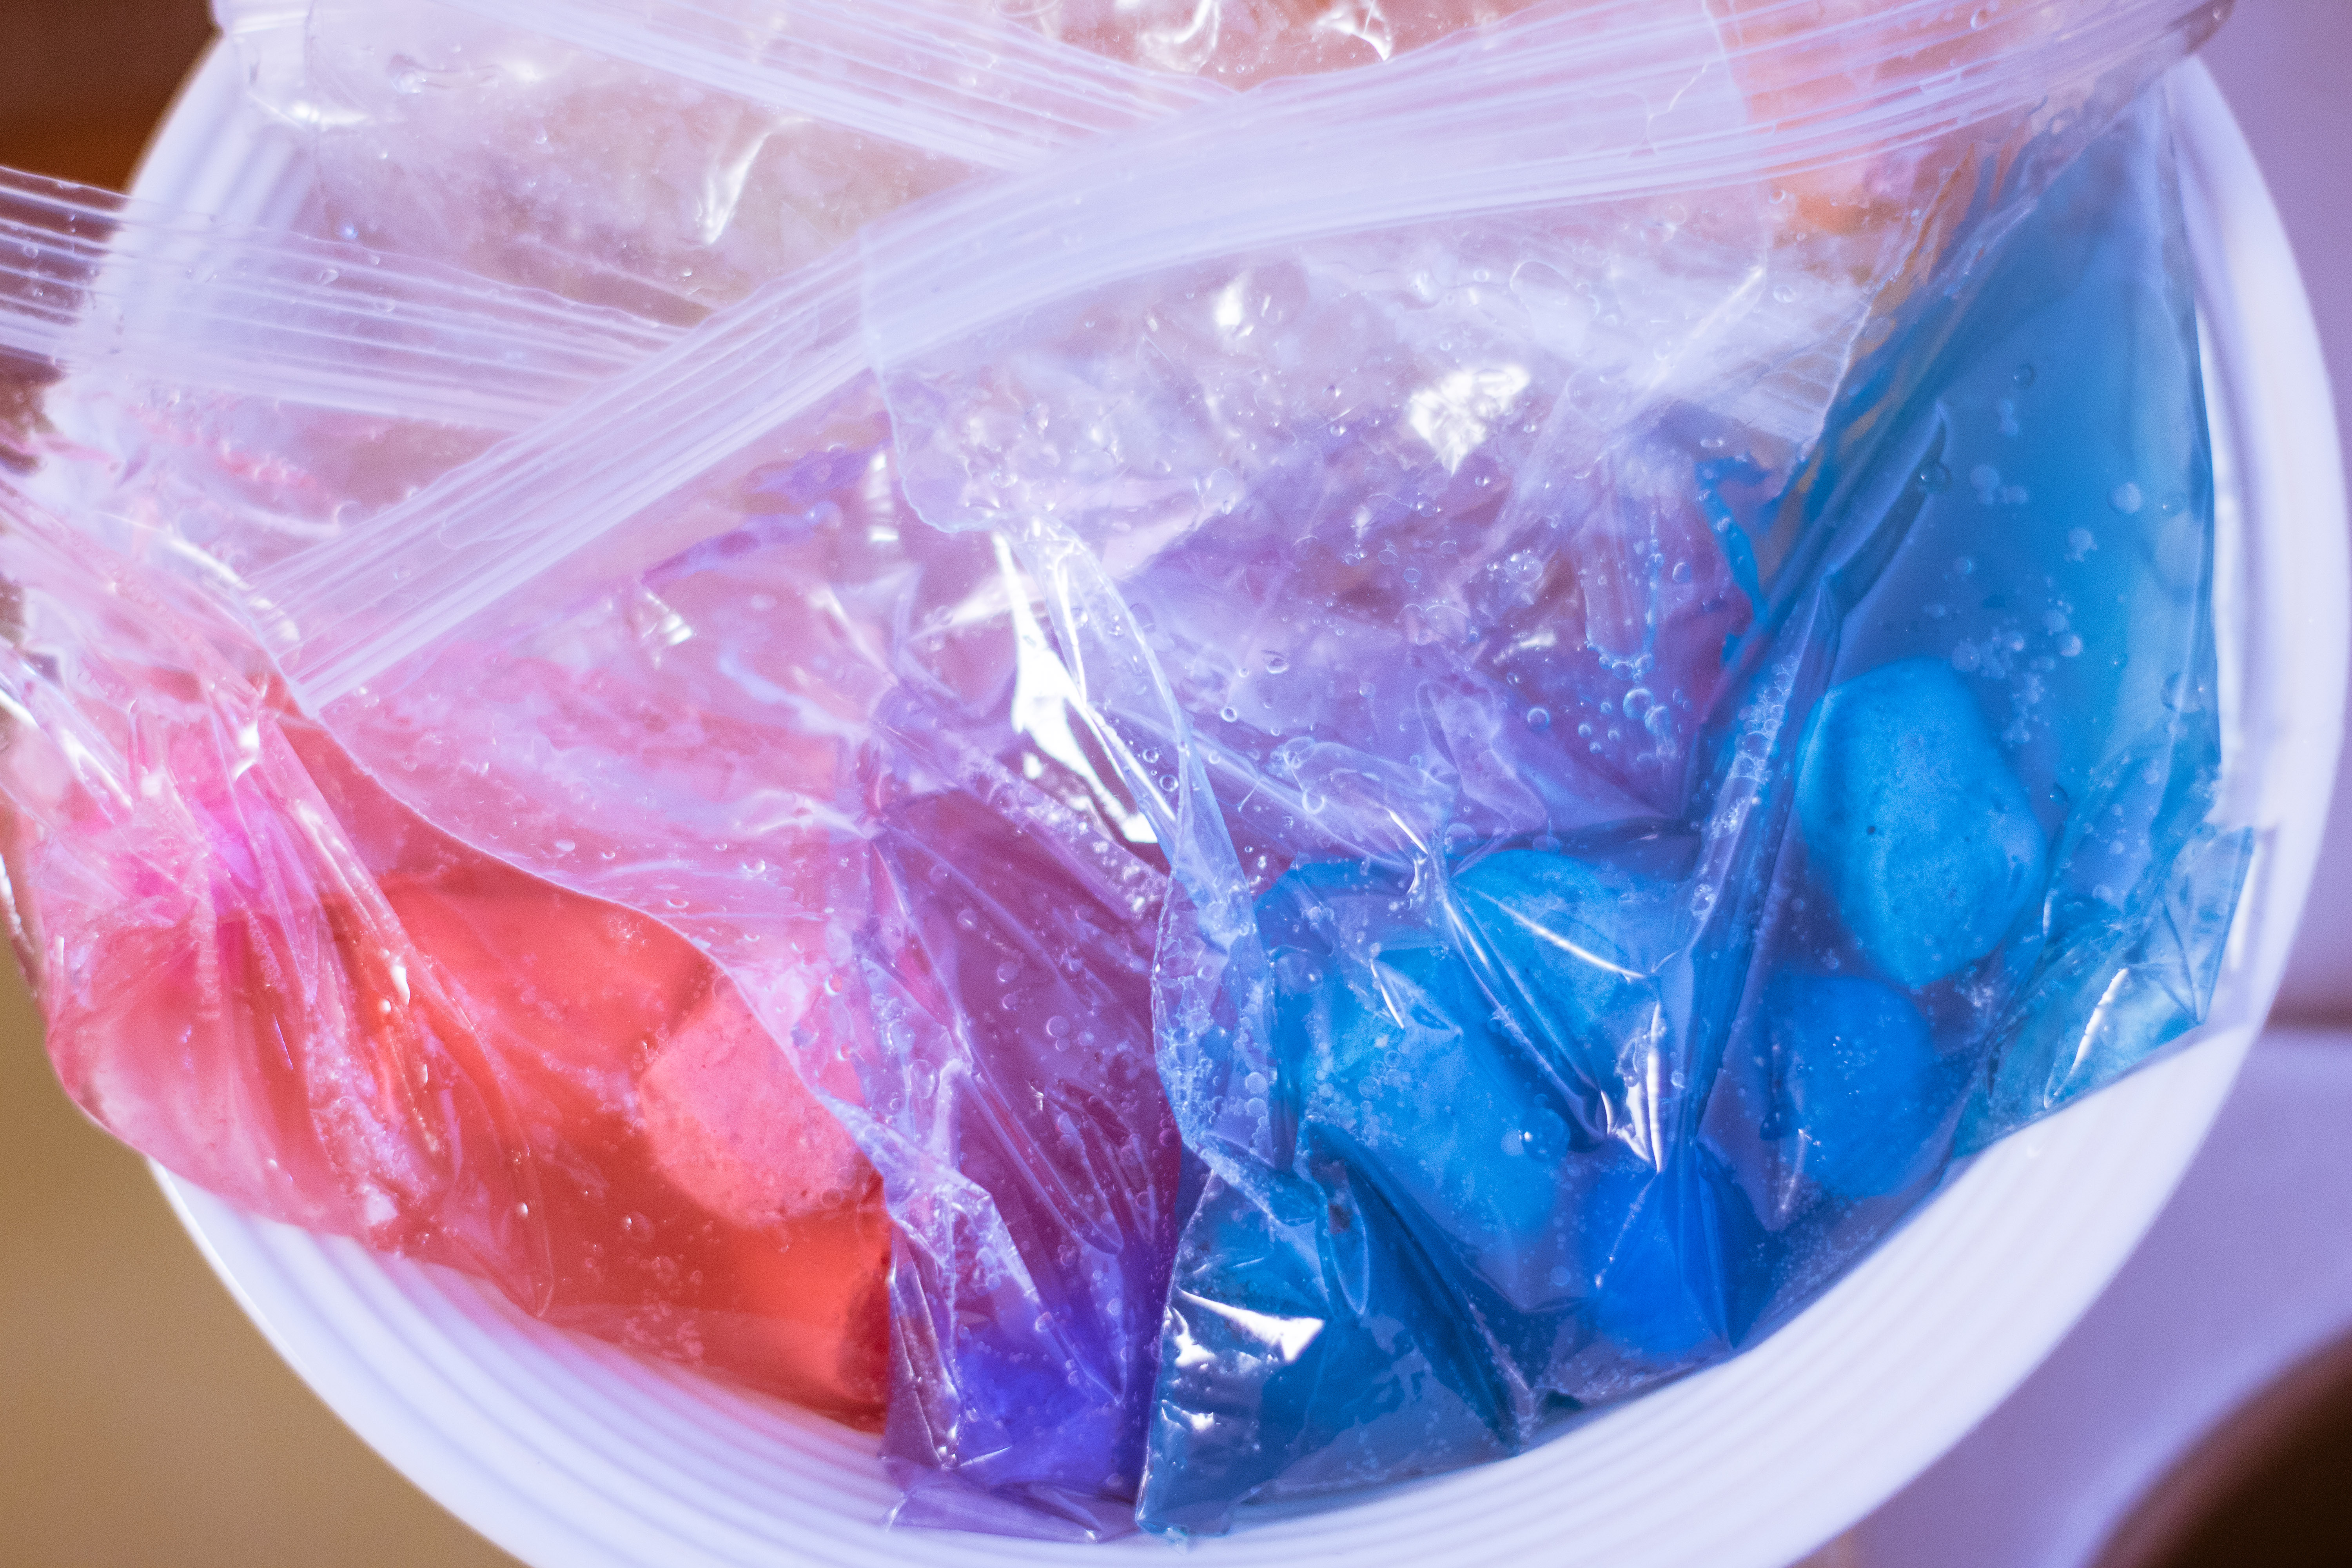 Place all the bags of chalk and water zipper-side-up in a large bowl to make your sidewalk chalk paint